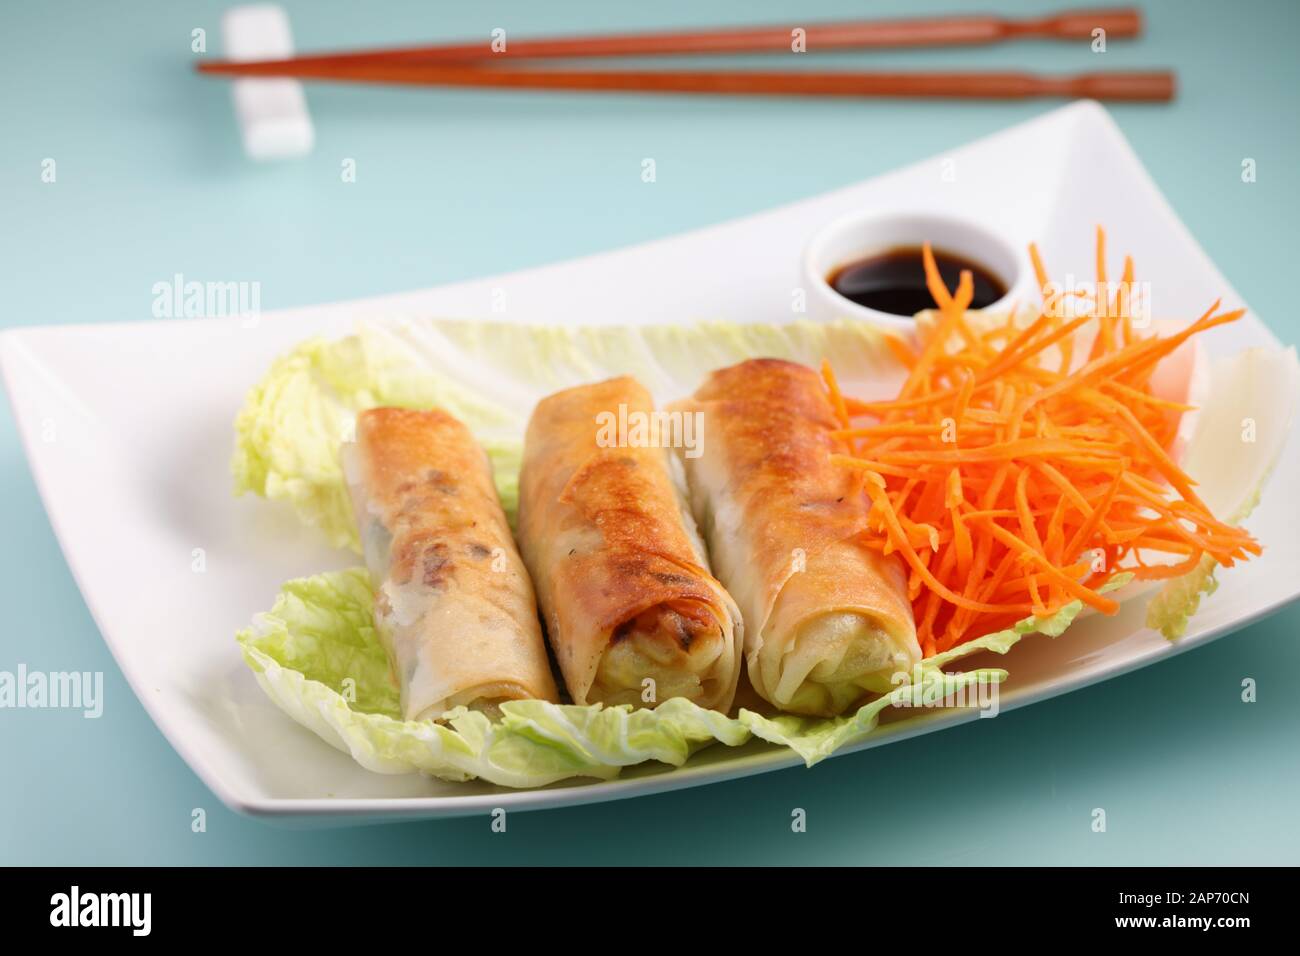 Spring rolls with napa cabbage and carrots served with soy sauce Stock Photo